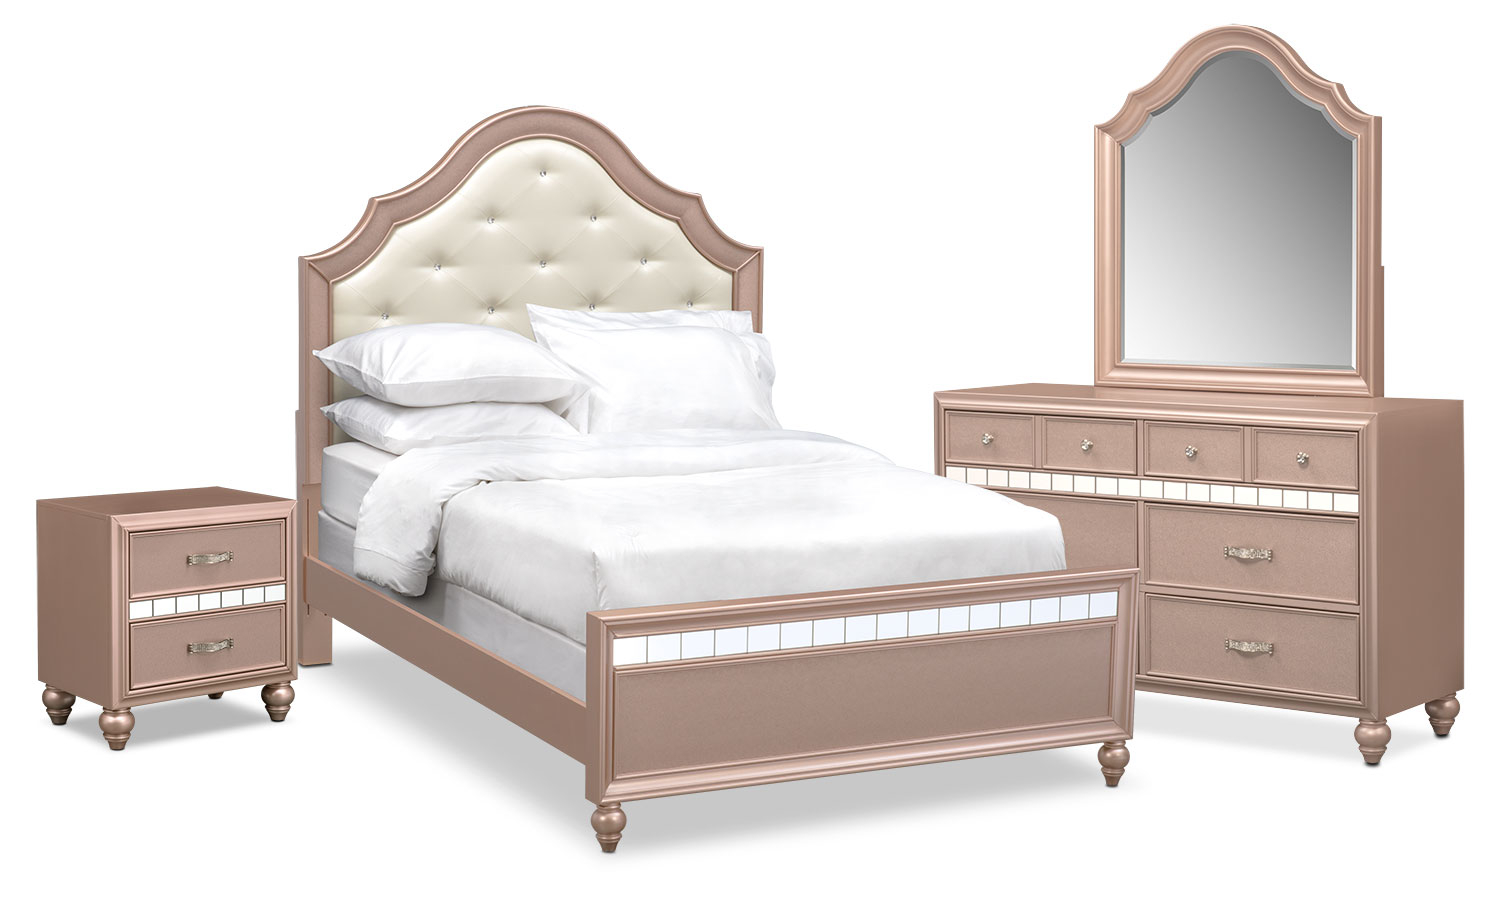 Serena Youth 6 Piece Bedroom Set With Nightstand Dresser And Mirror intended for proportions 1500 X 921